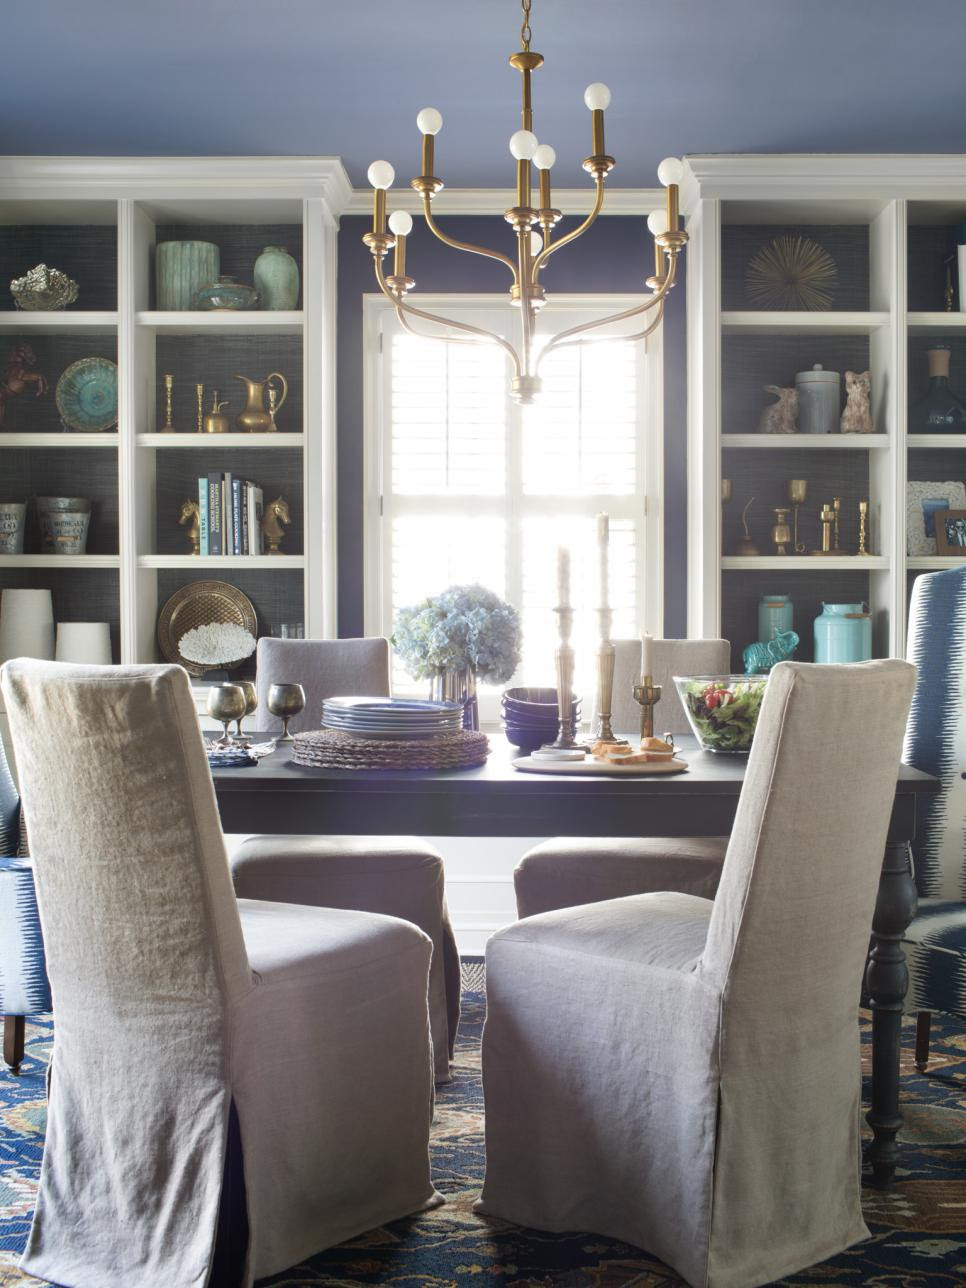 Spice Up Your Dining Room With Stylish Slipcovers | HGTV